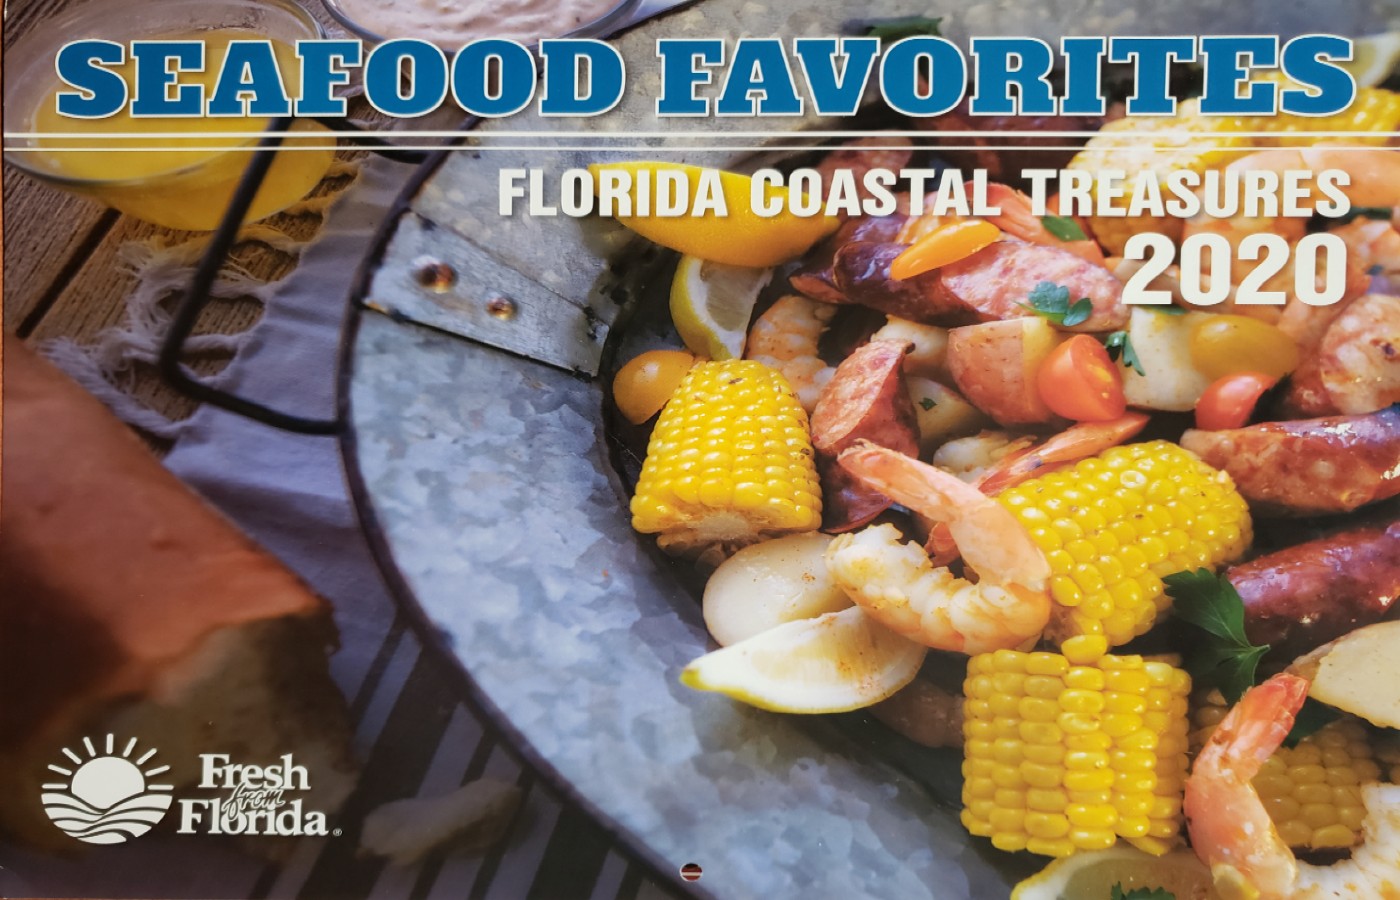 Seafood Favorites cover insert